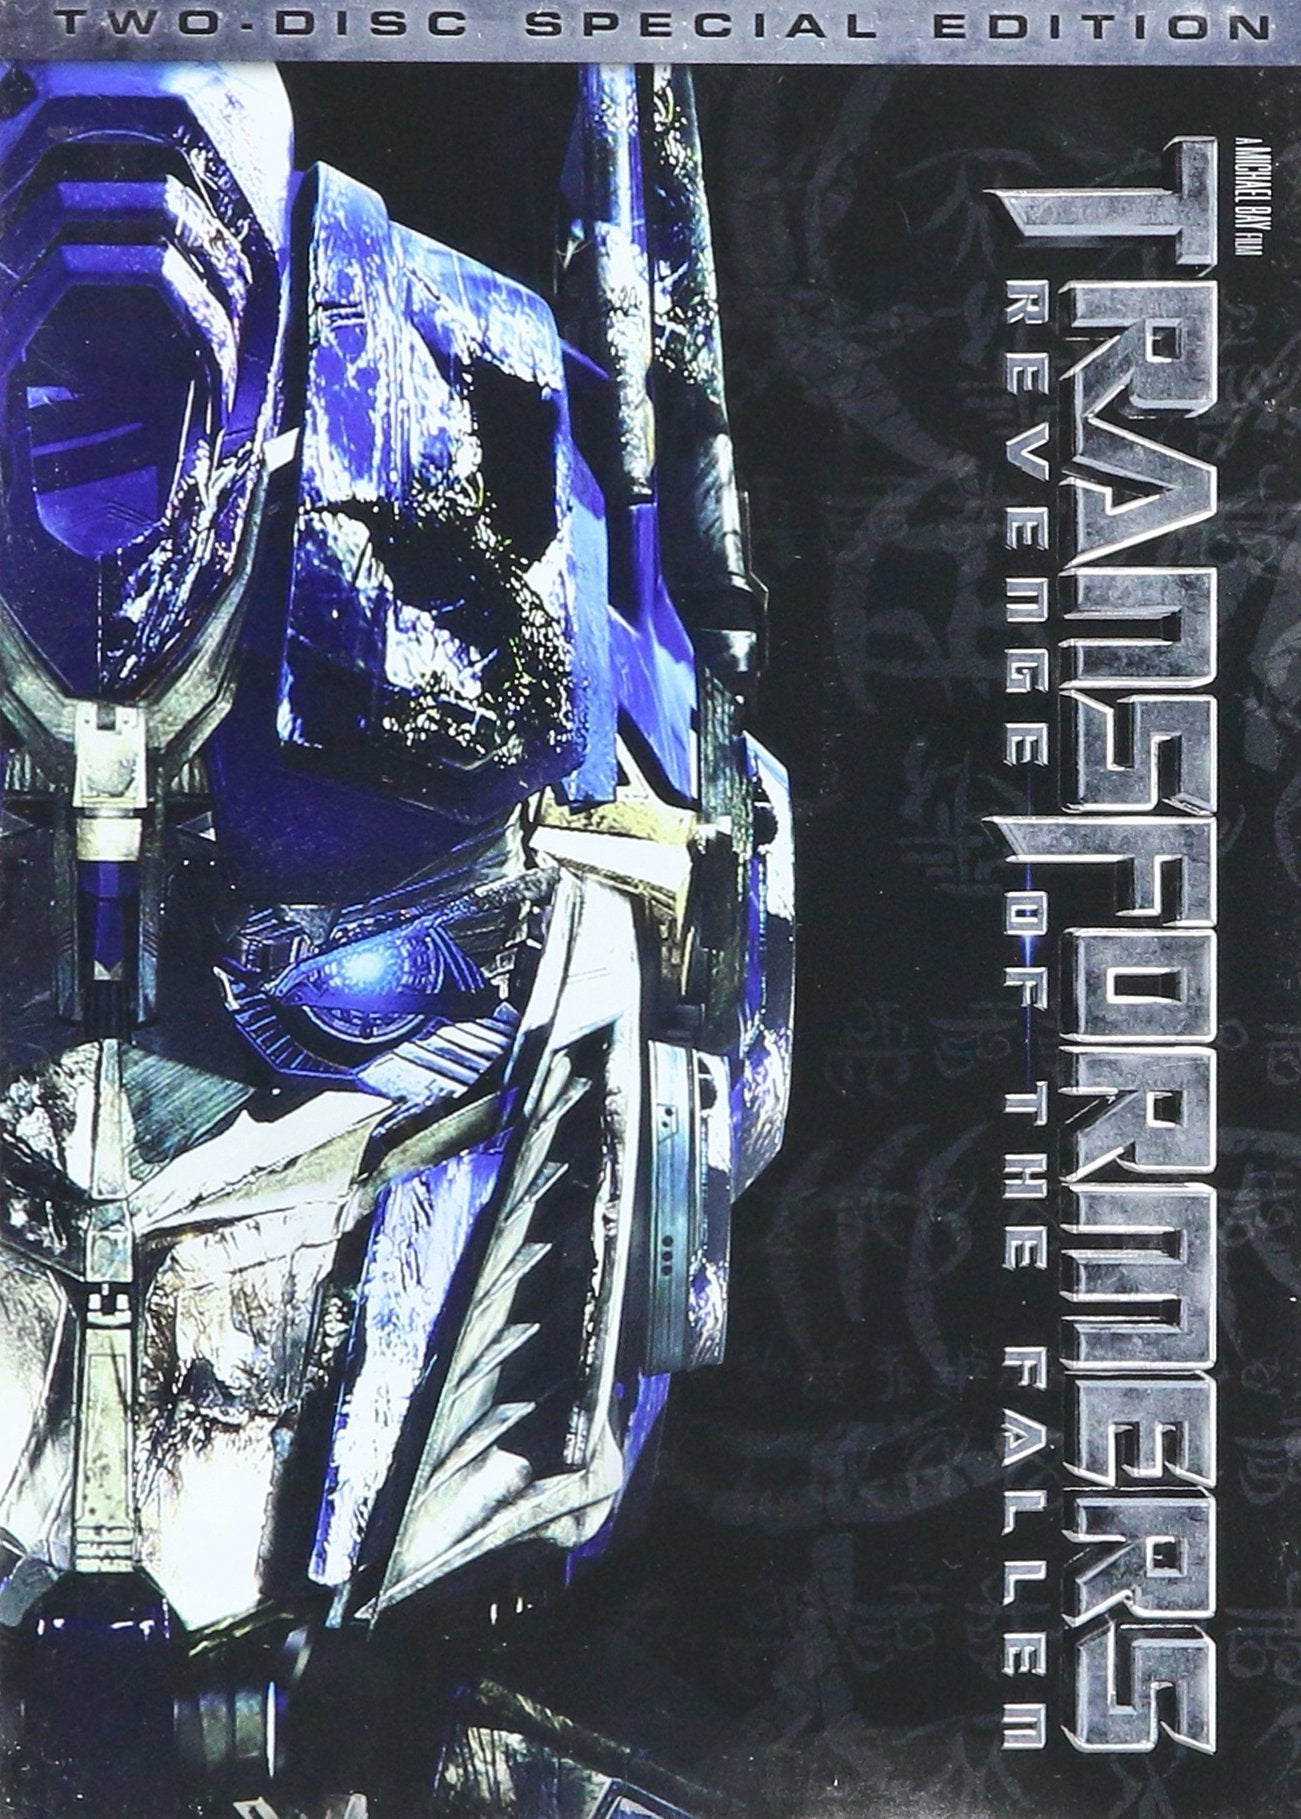 TRANSFORMERS: REVENGE OF THE FALLEN (2-DISC SPECIAL EDITION) DVD